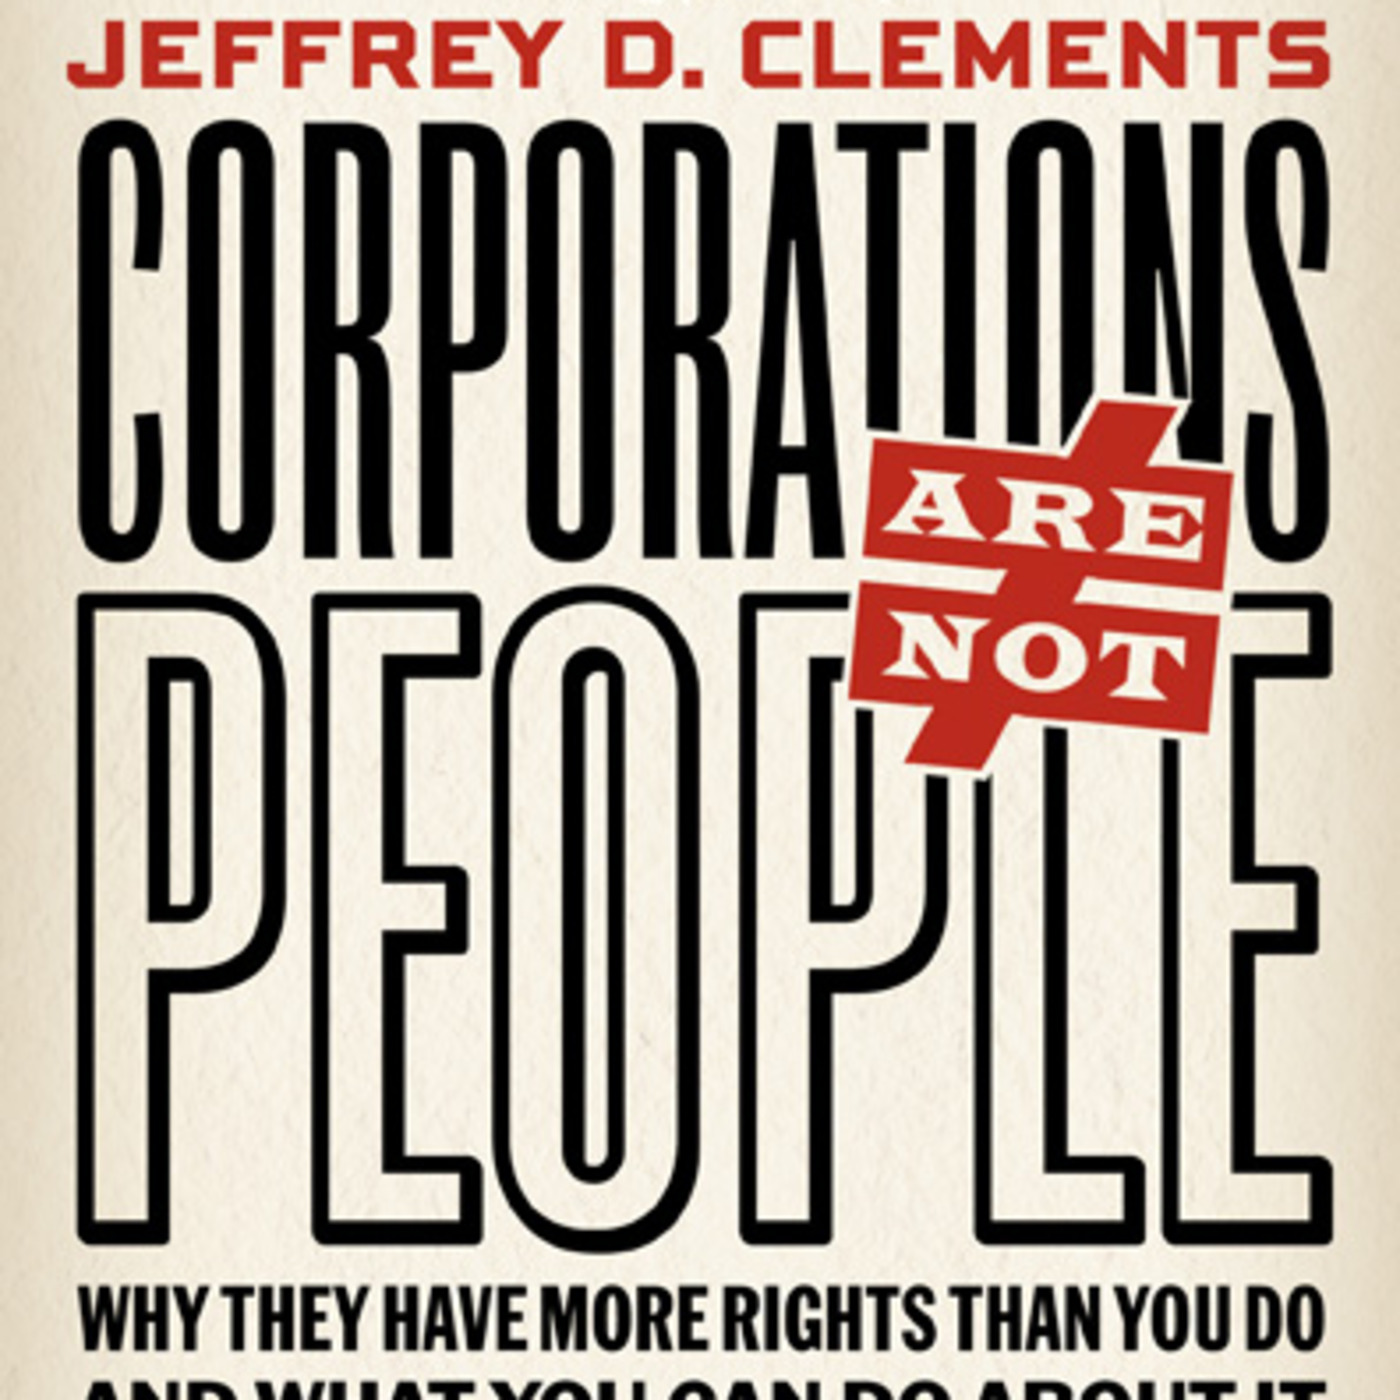 Are Corporations People, My Friend?